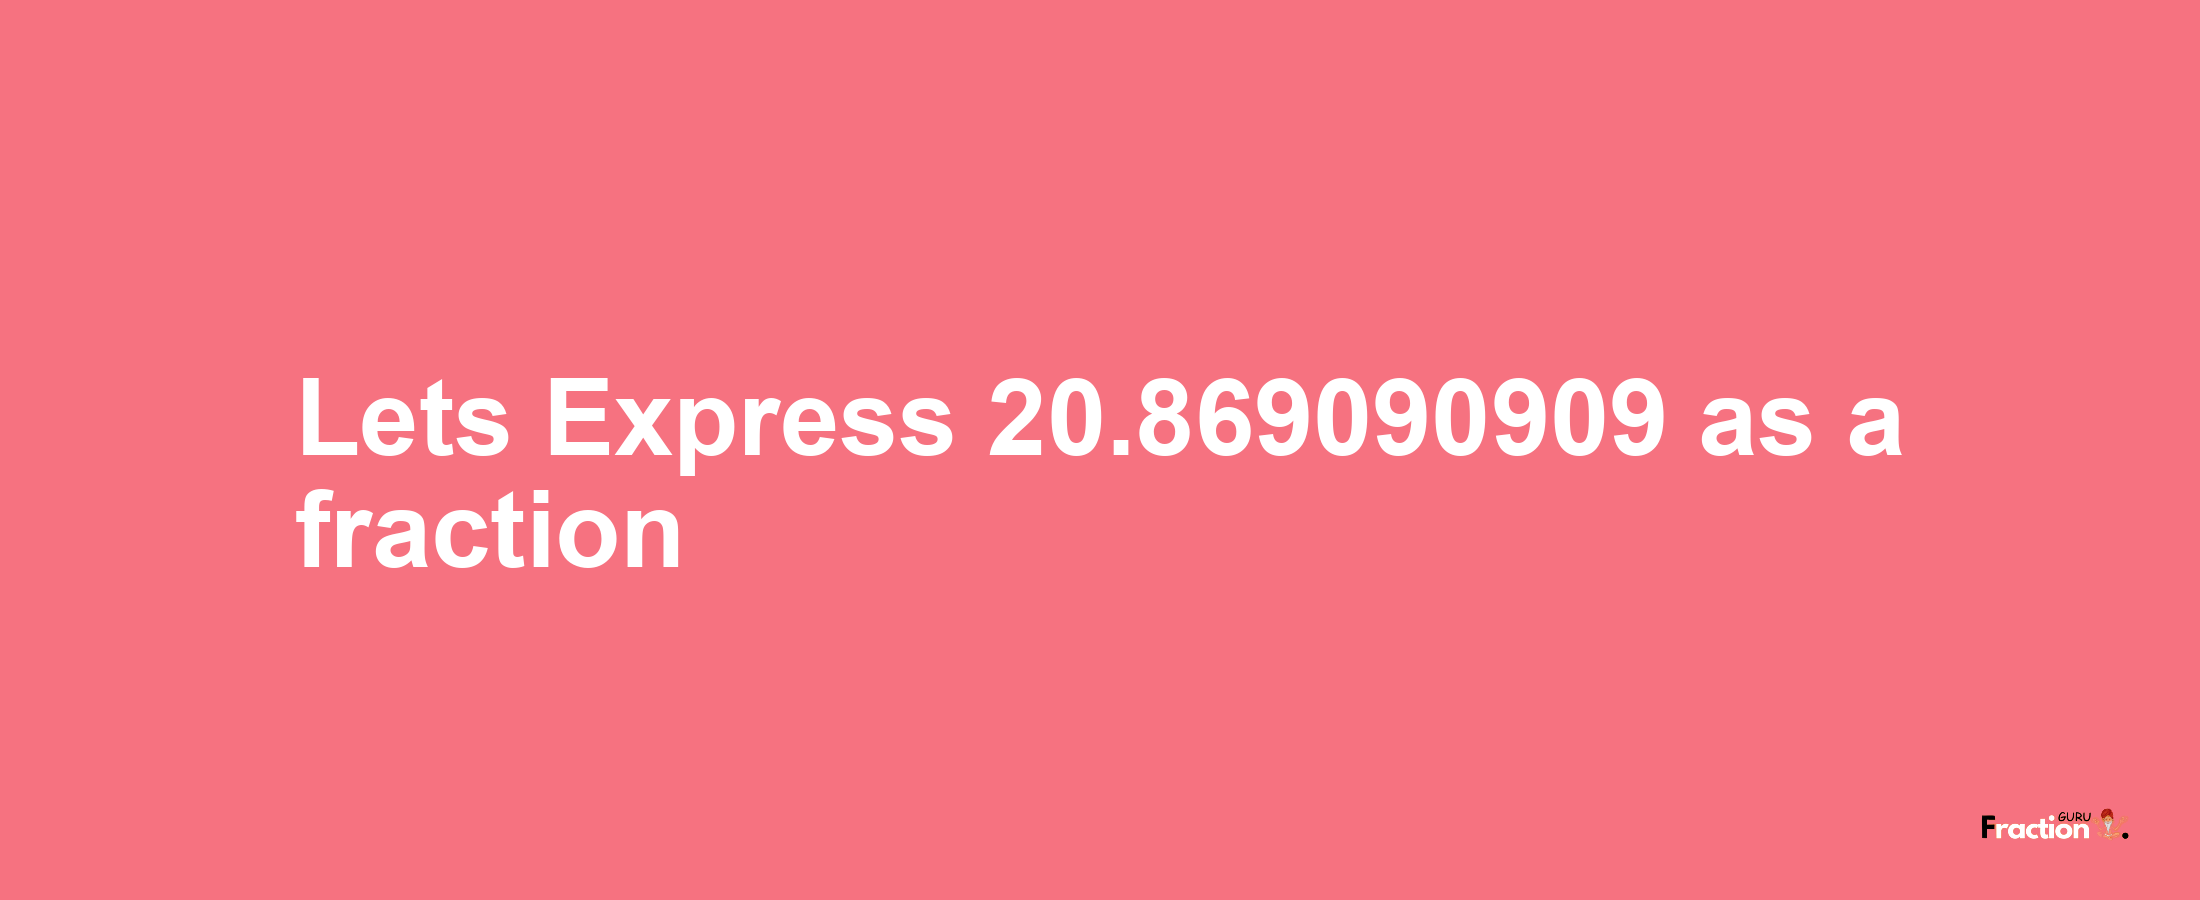 Lets Express 20.869090909 as afraction